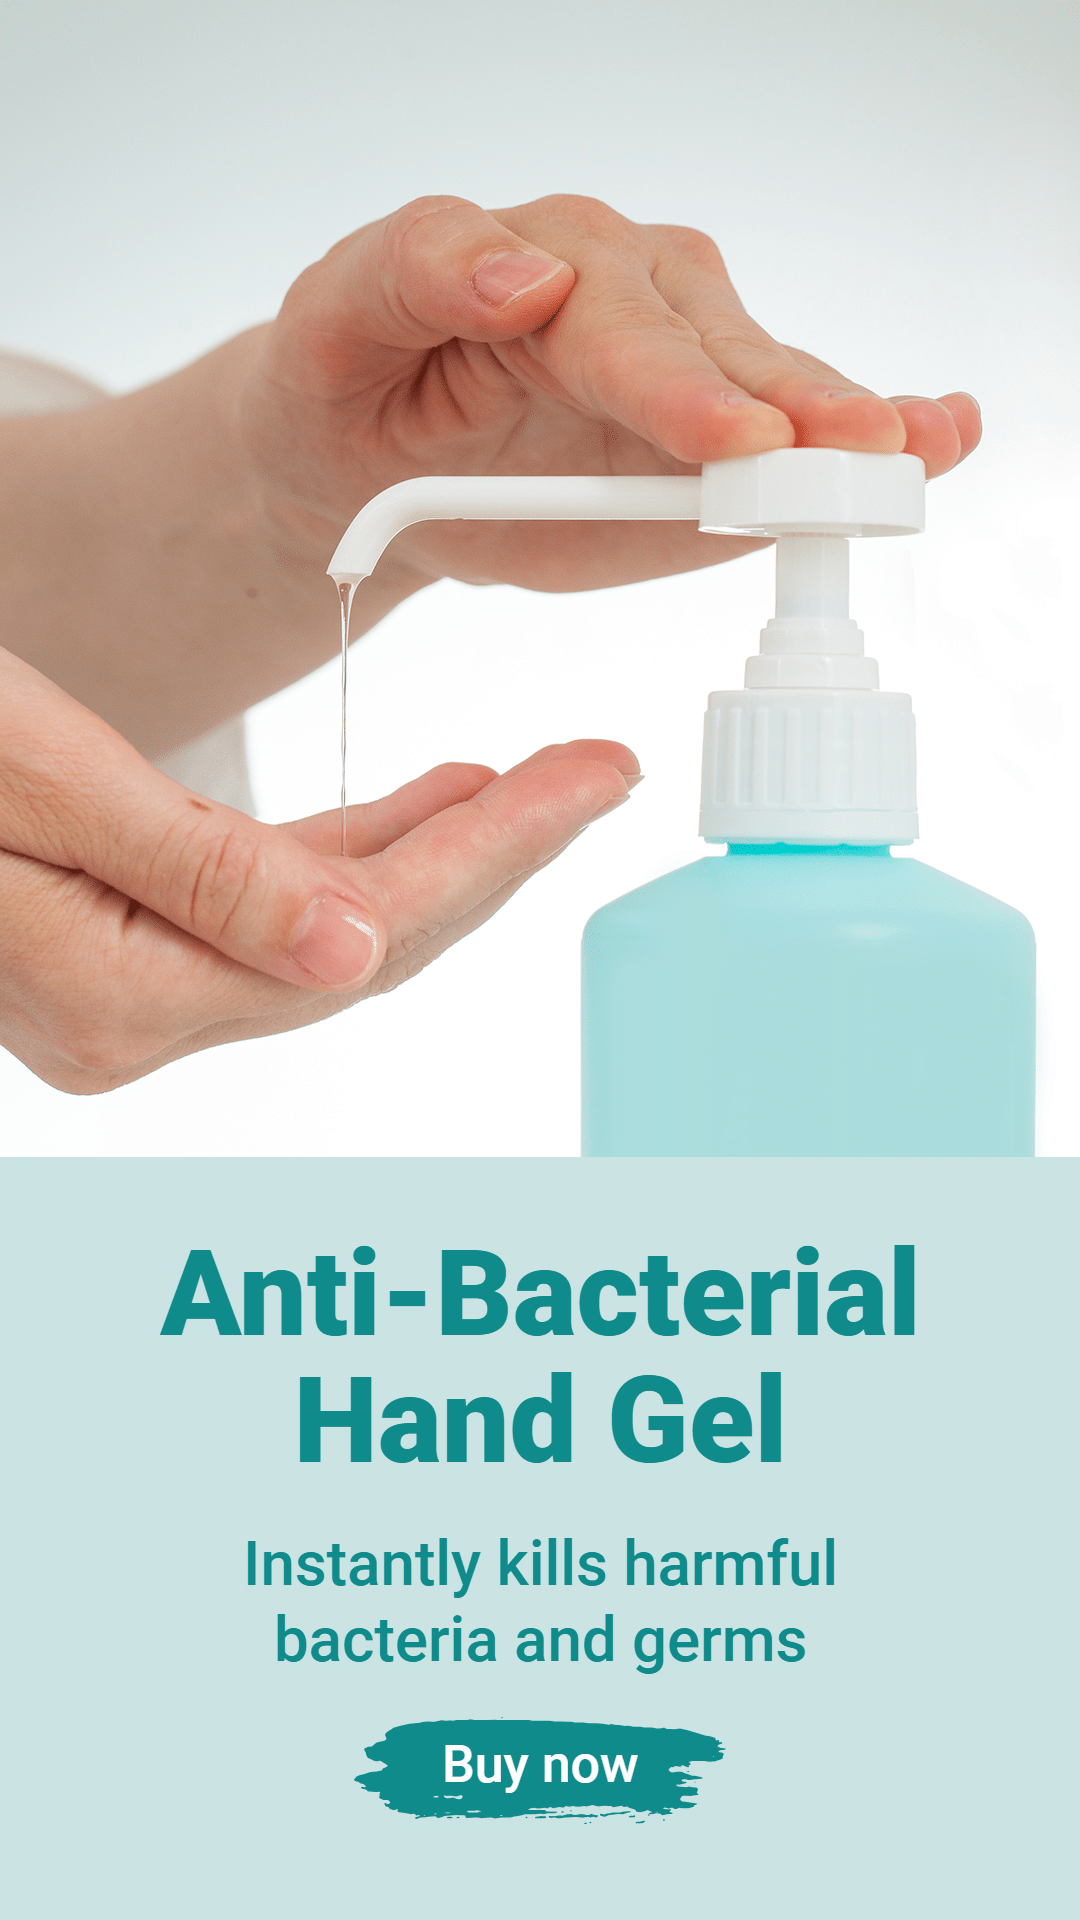 Simple Anti-Bacterial Hand Gel Promotion Ecommerce Story预览效果